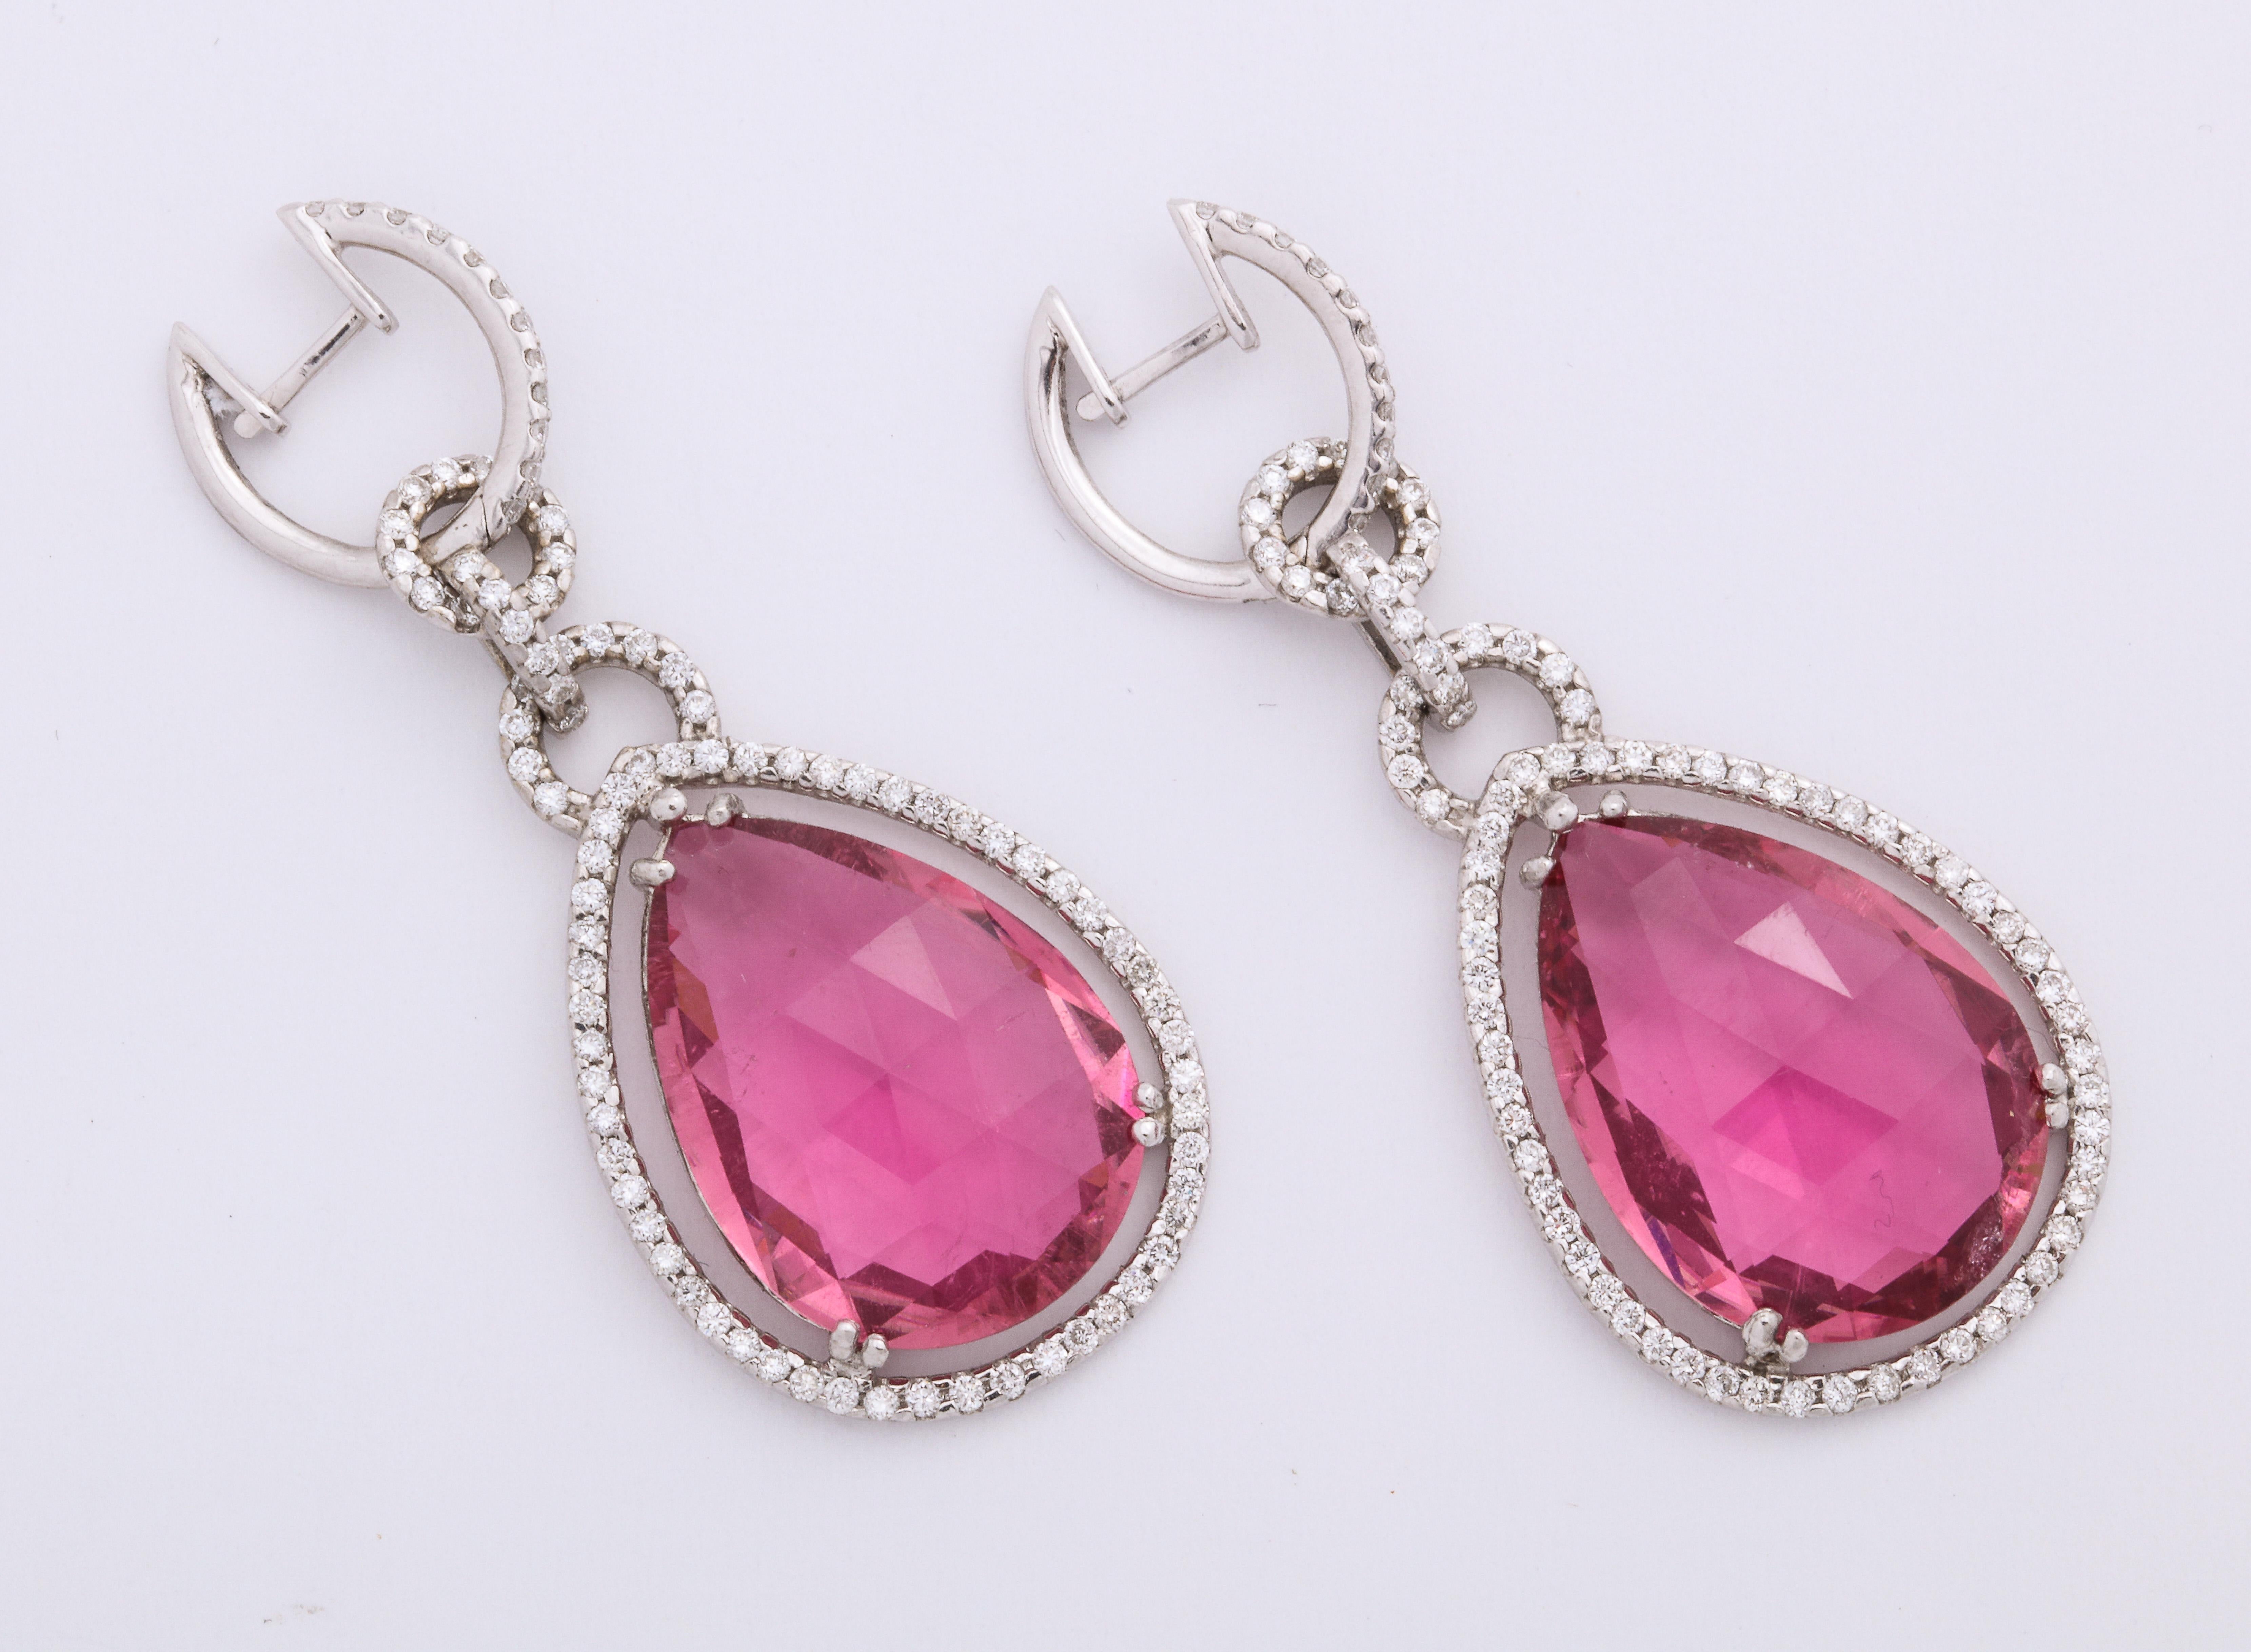 Fun, modern and bold 18K white gold hoop earrings decorated with colorless round brilliant-cut diamonds: 1.45 carats, suspending floating pear-shaped, briolette polish, rosy pink tourmaline pendants earrings.  For pierced ears only.
Dimensions: